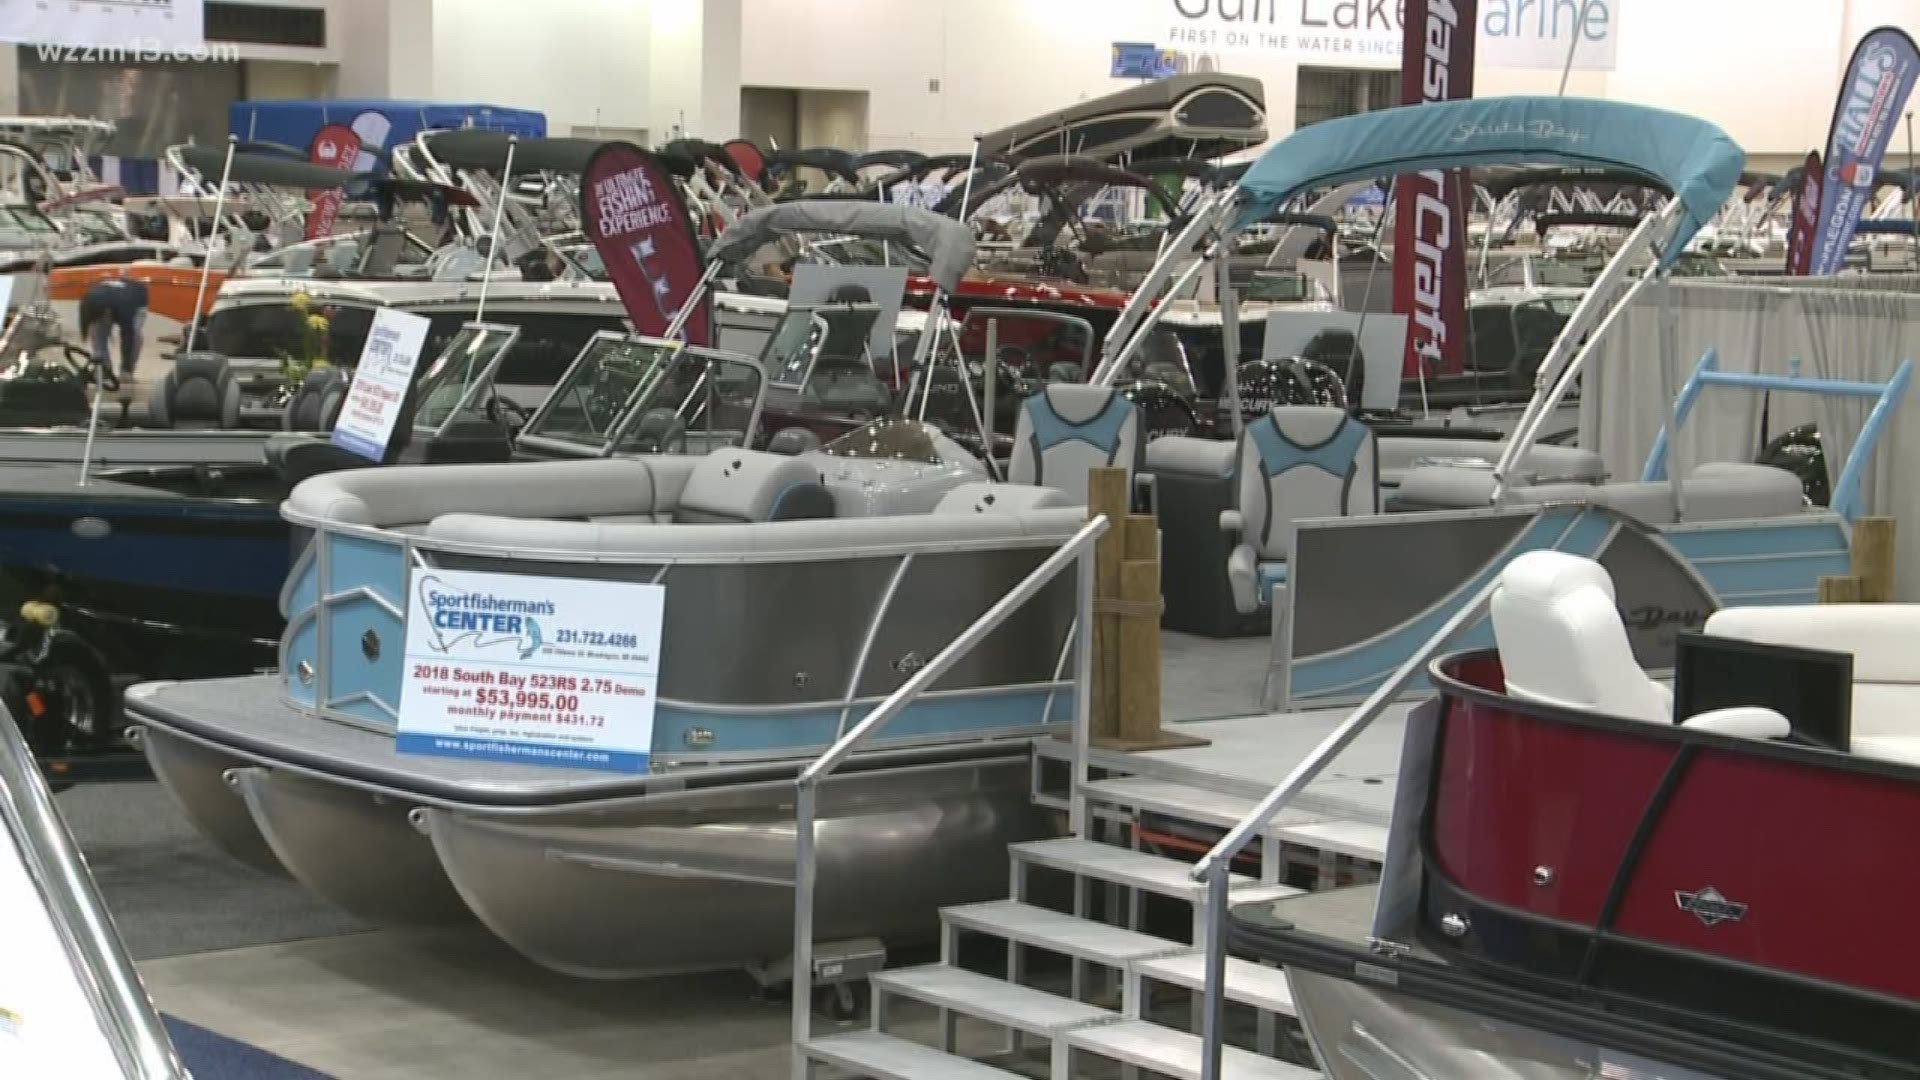 The Grand Rapids Boat Show returns to West Michigan for its 75th year. The annual event opens at DeVos Place on Wednesday, Feb. 19.